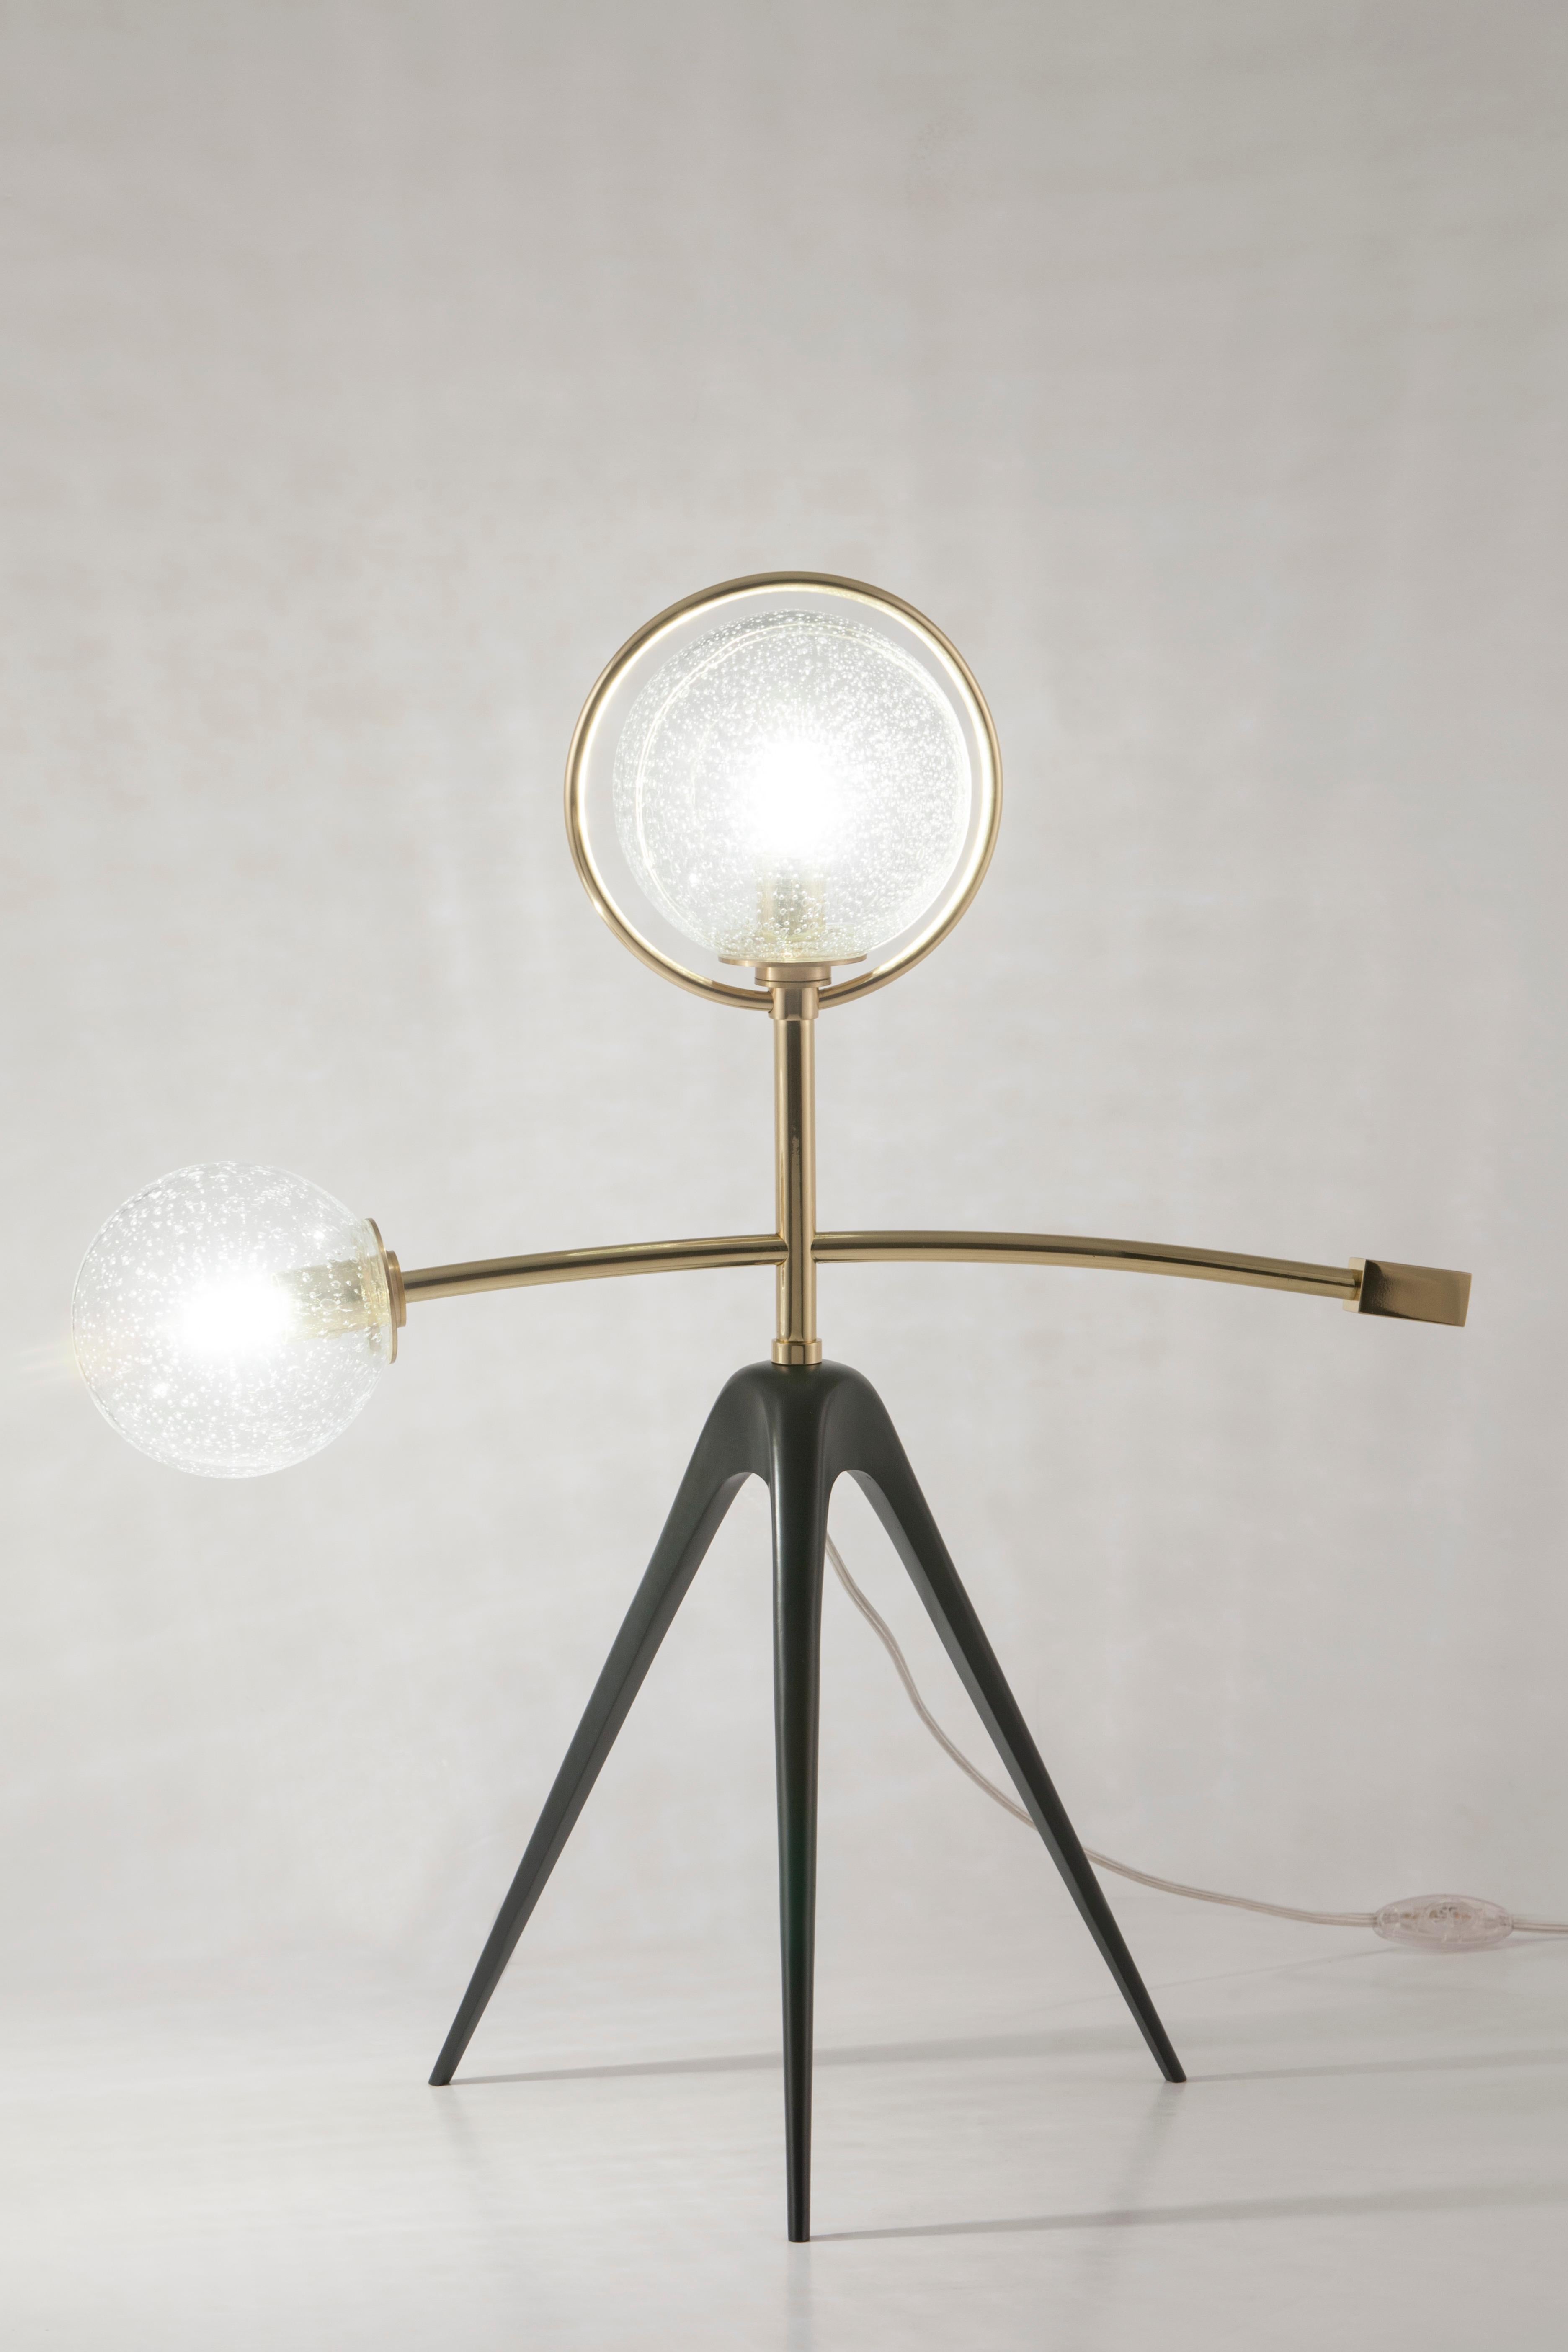 Mobile table lamp, Contemporary Collection, handcrafted in Portugal - Europe by Greenapple.

Mobile is a modern lighting concept and an attractive addition to a modern home. A table lamp that brings creative visions to life. The polished brass frame